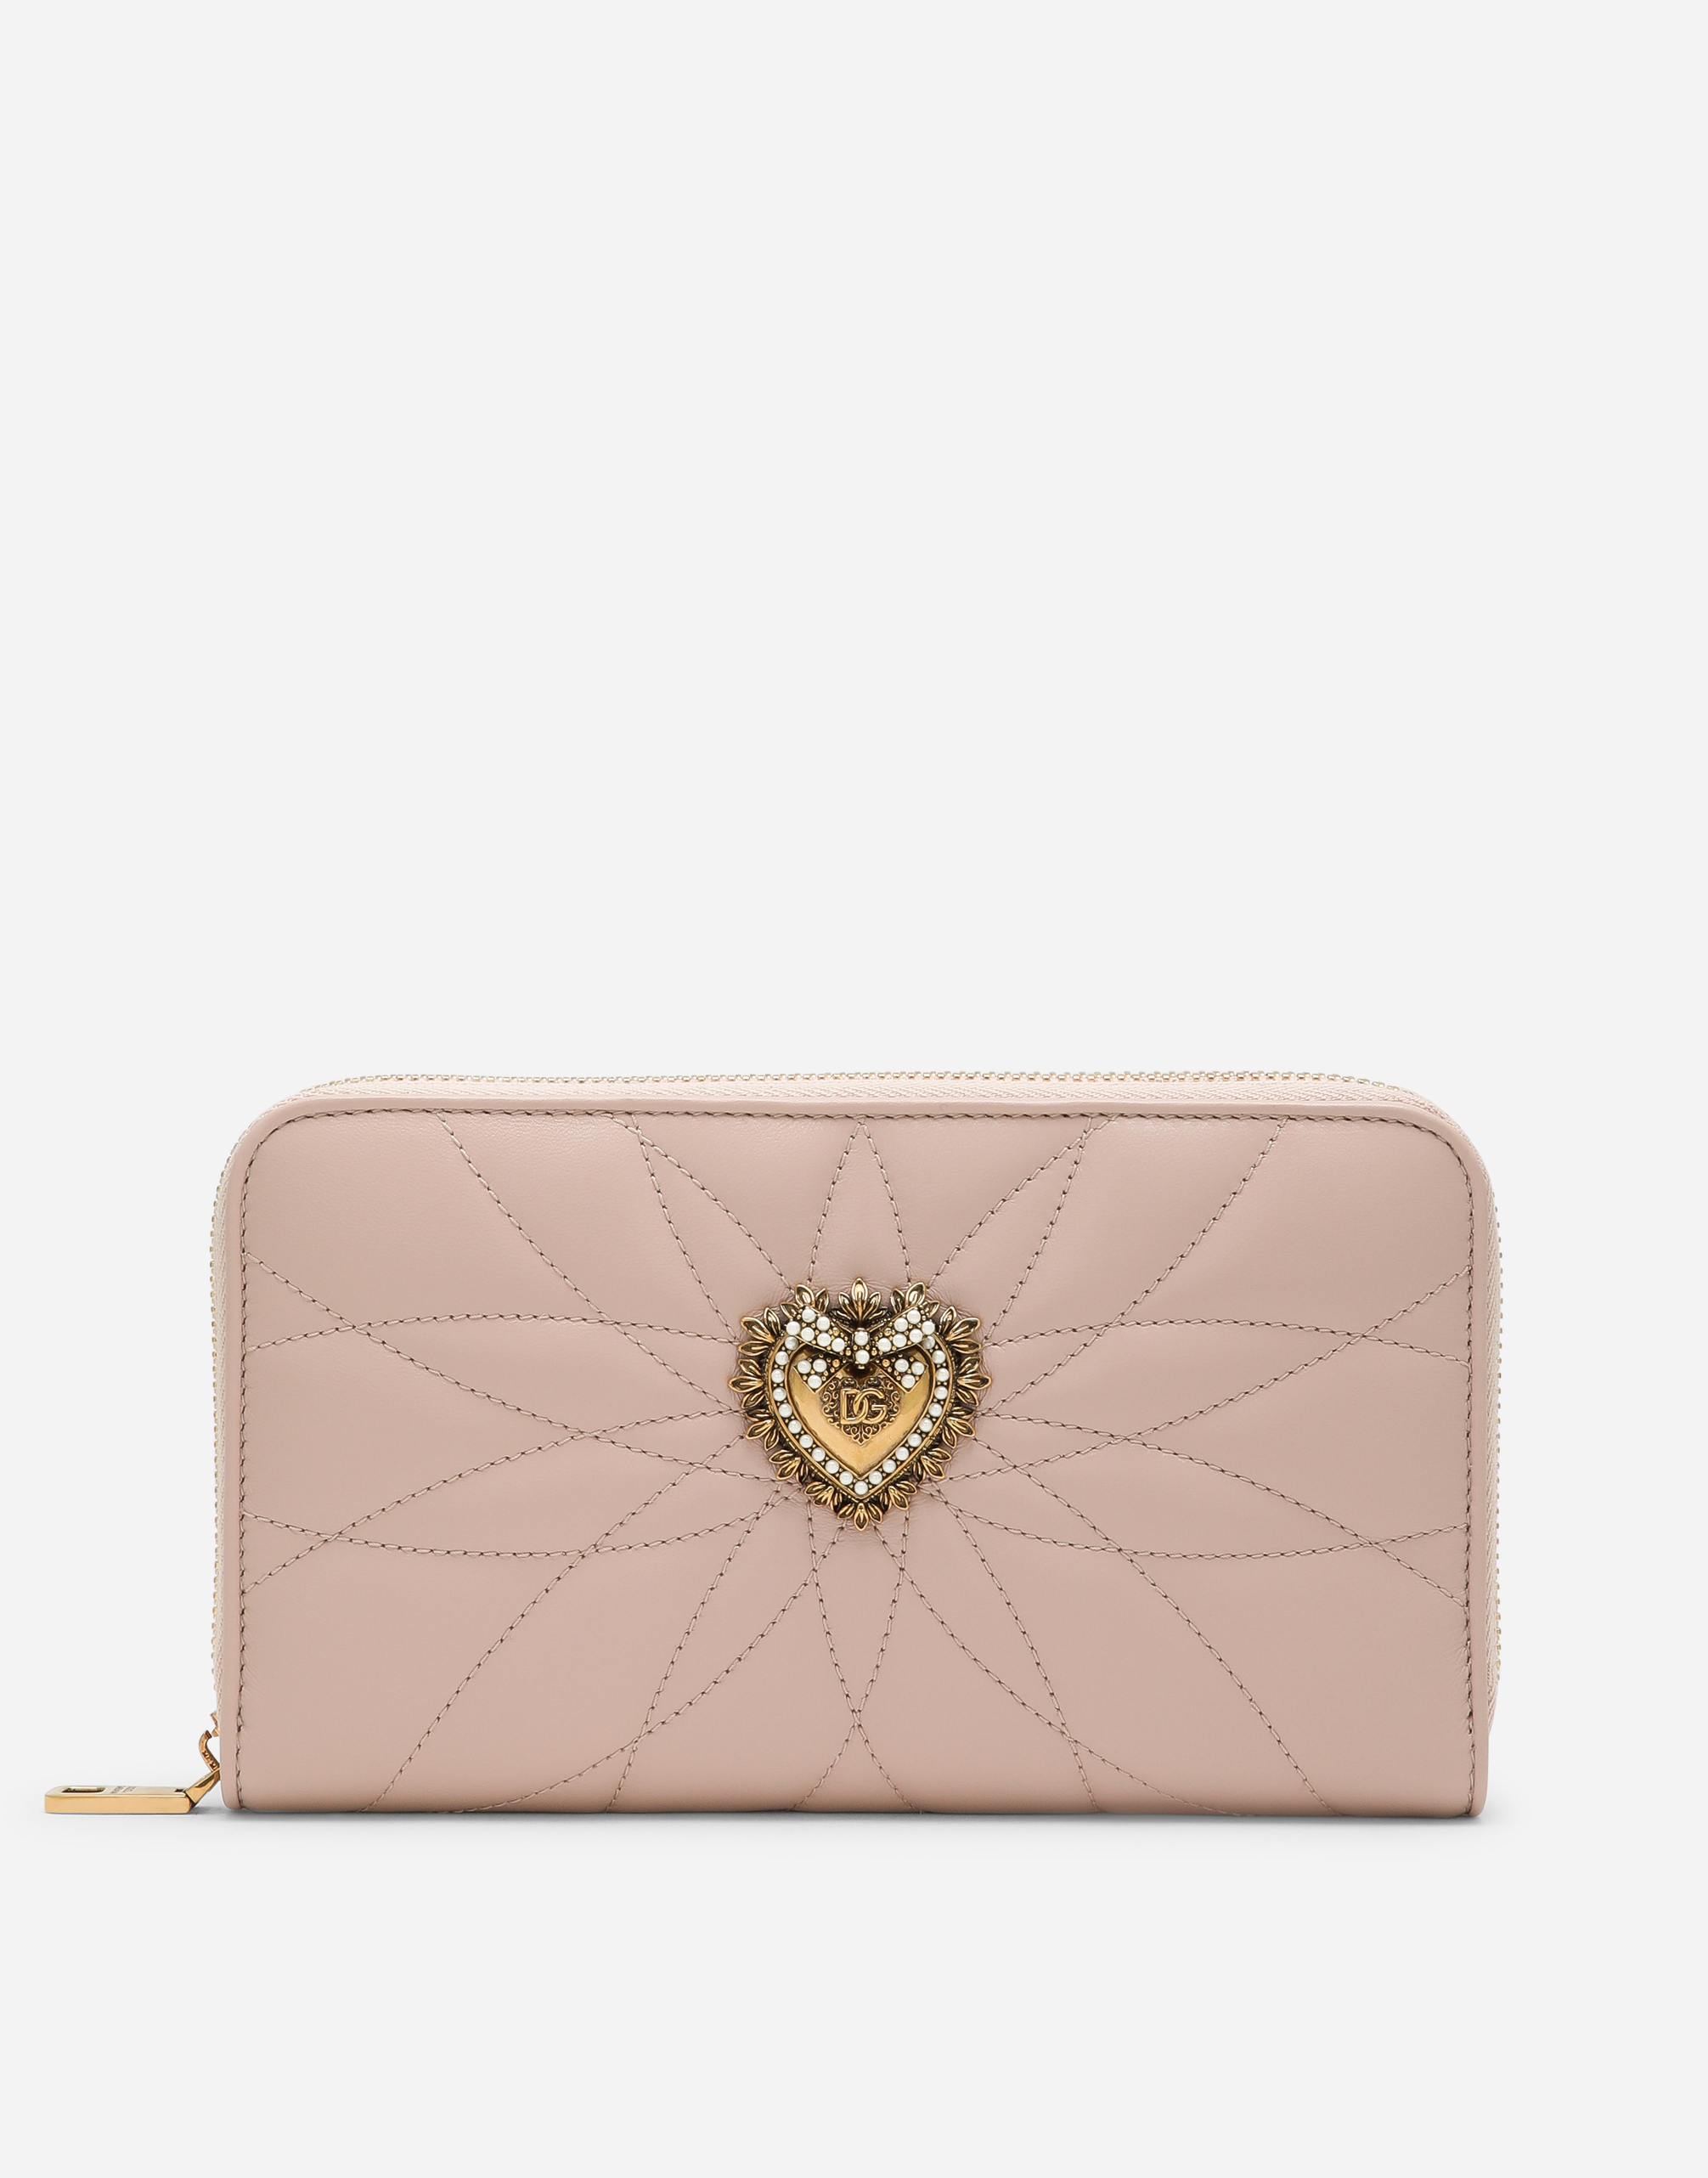 Zip-around Devotion wallet in nappa leather in Pale Pink